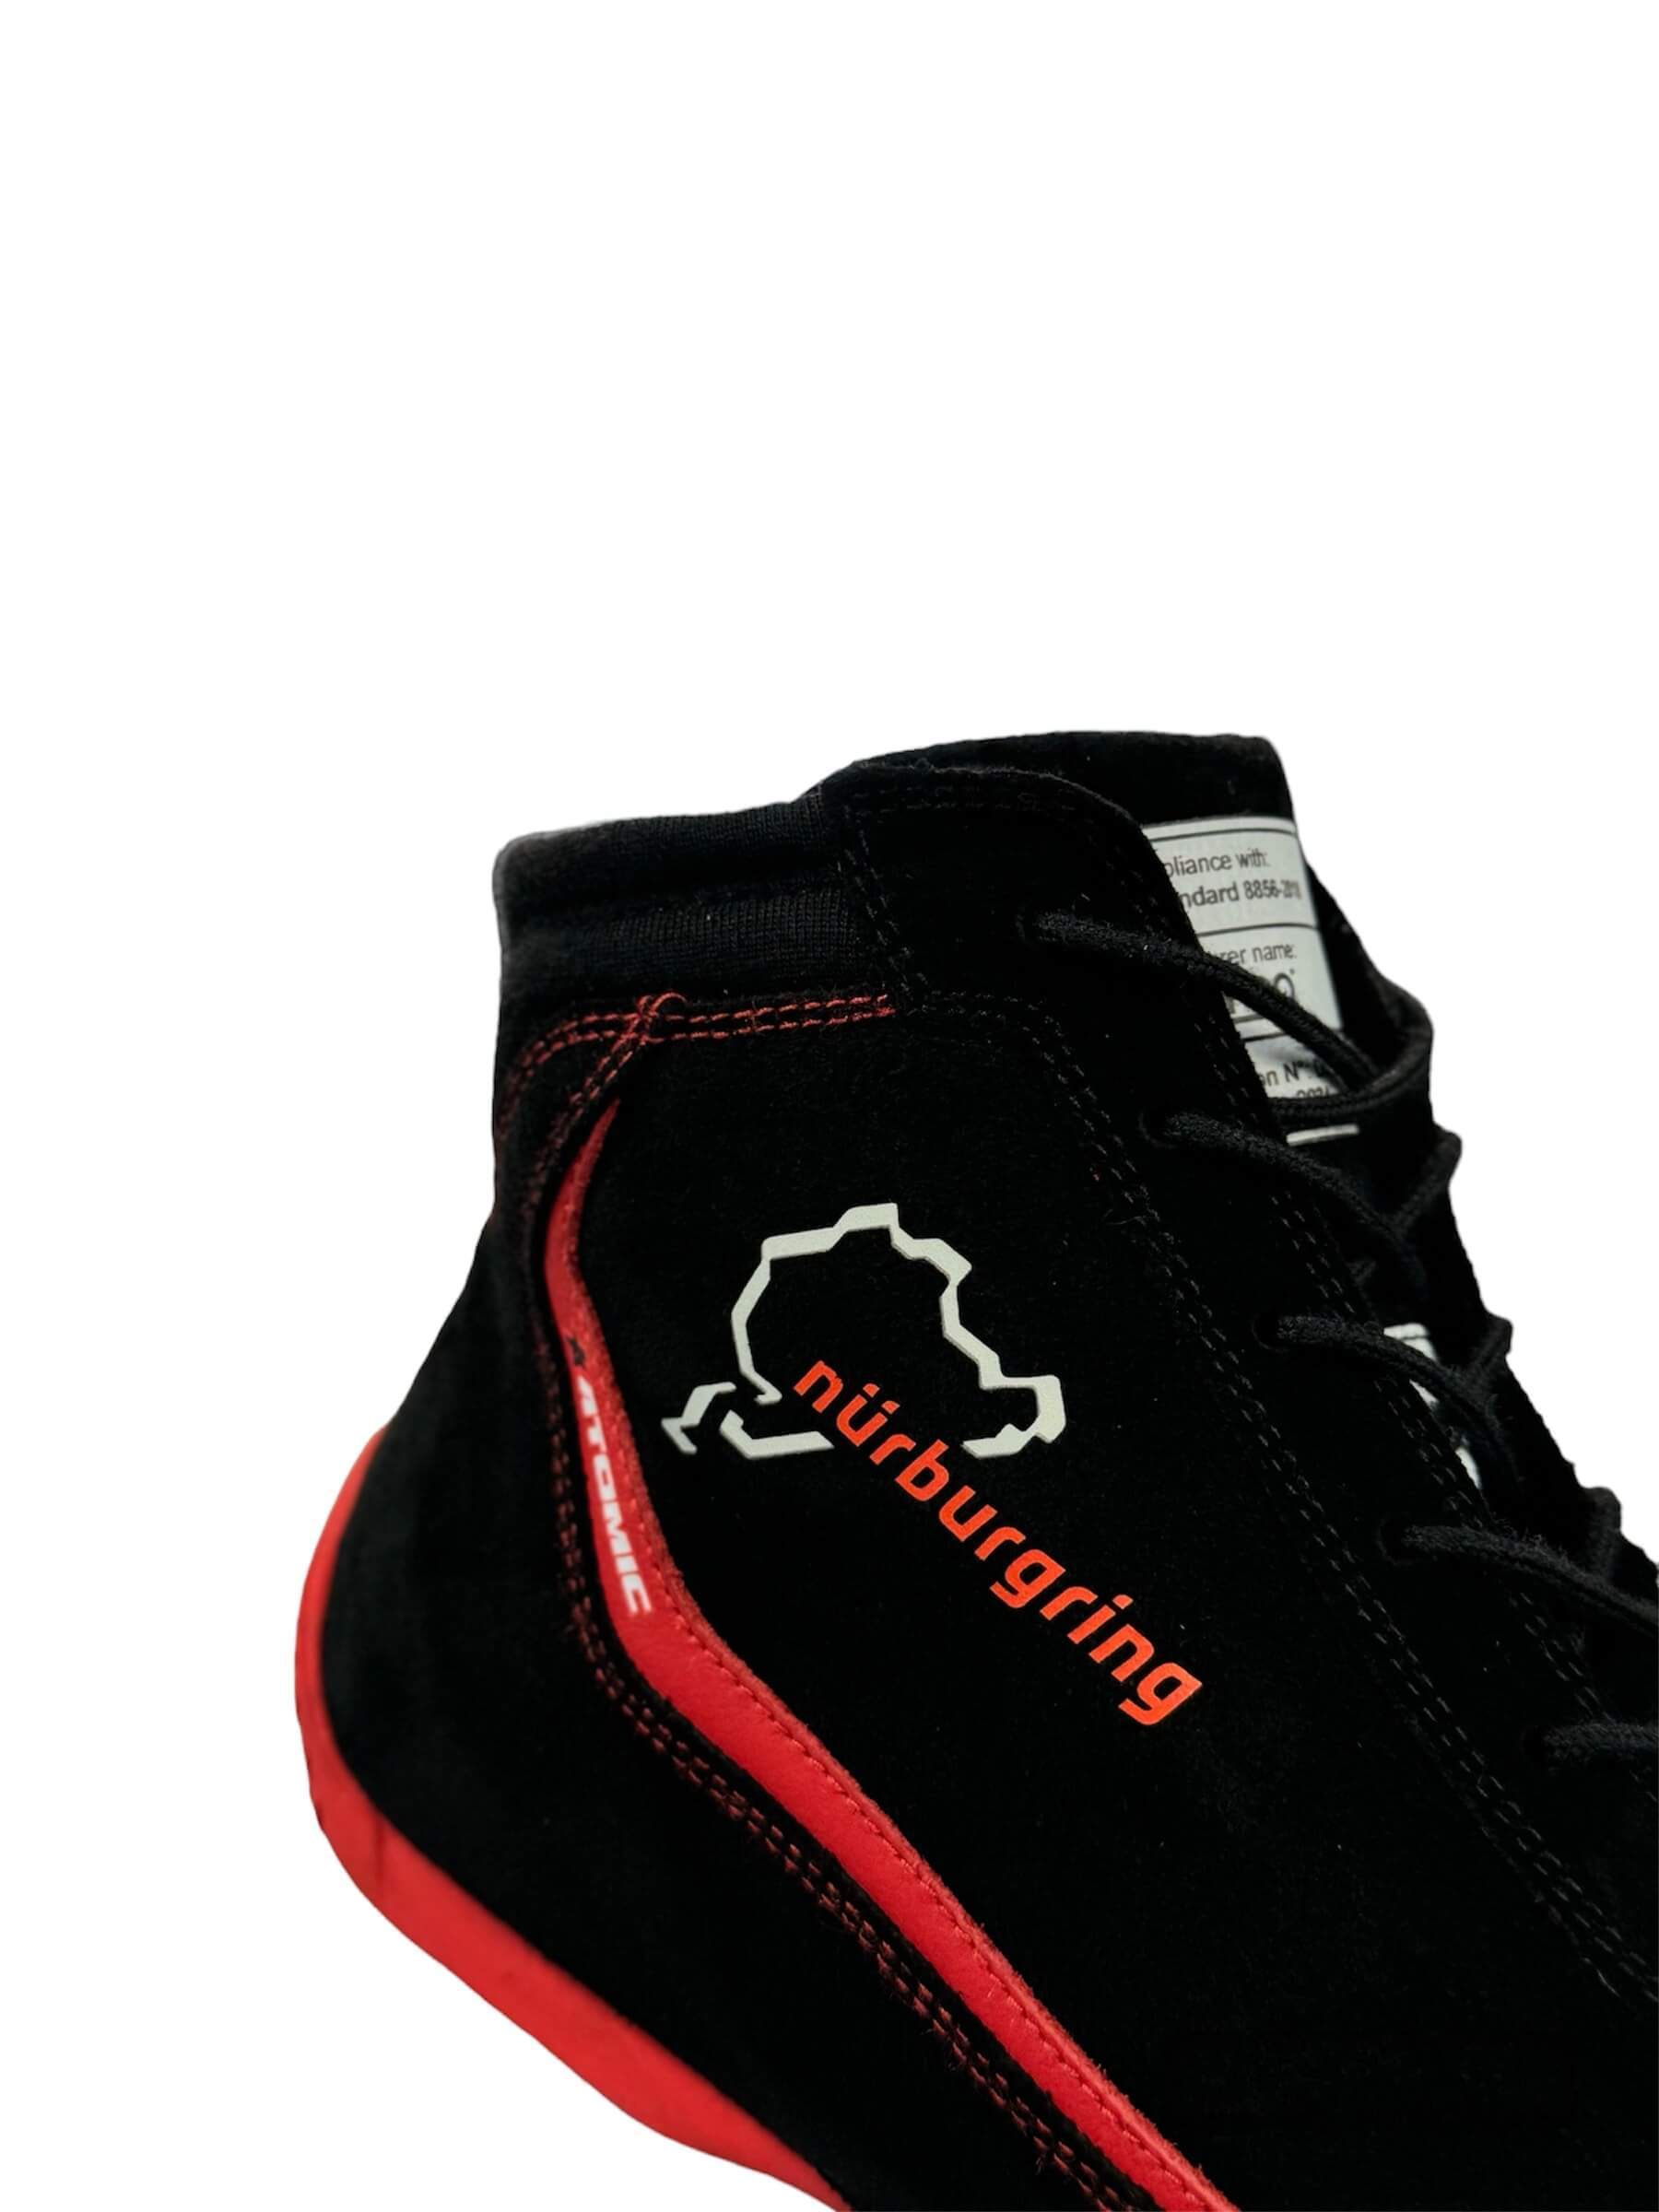 SPARCO 001295SP_NBR41 Shoes Slalom Nurburgring Edition black/red Size 41 Photo-4 